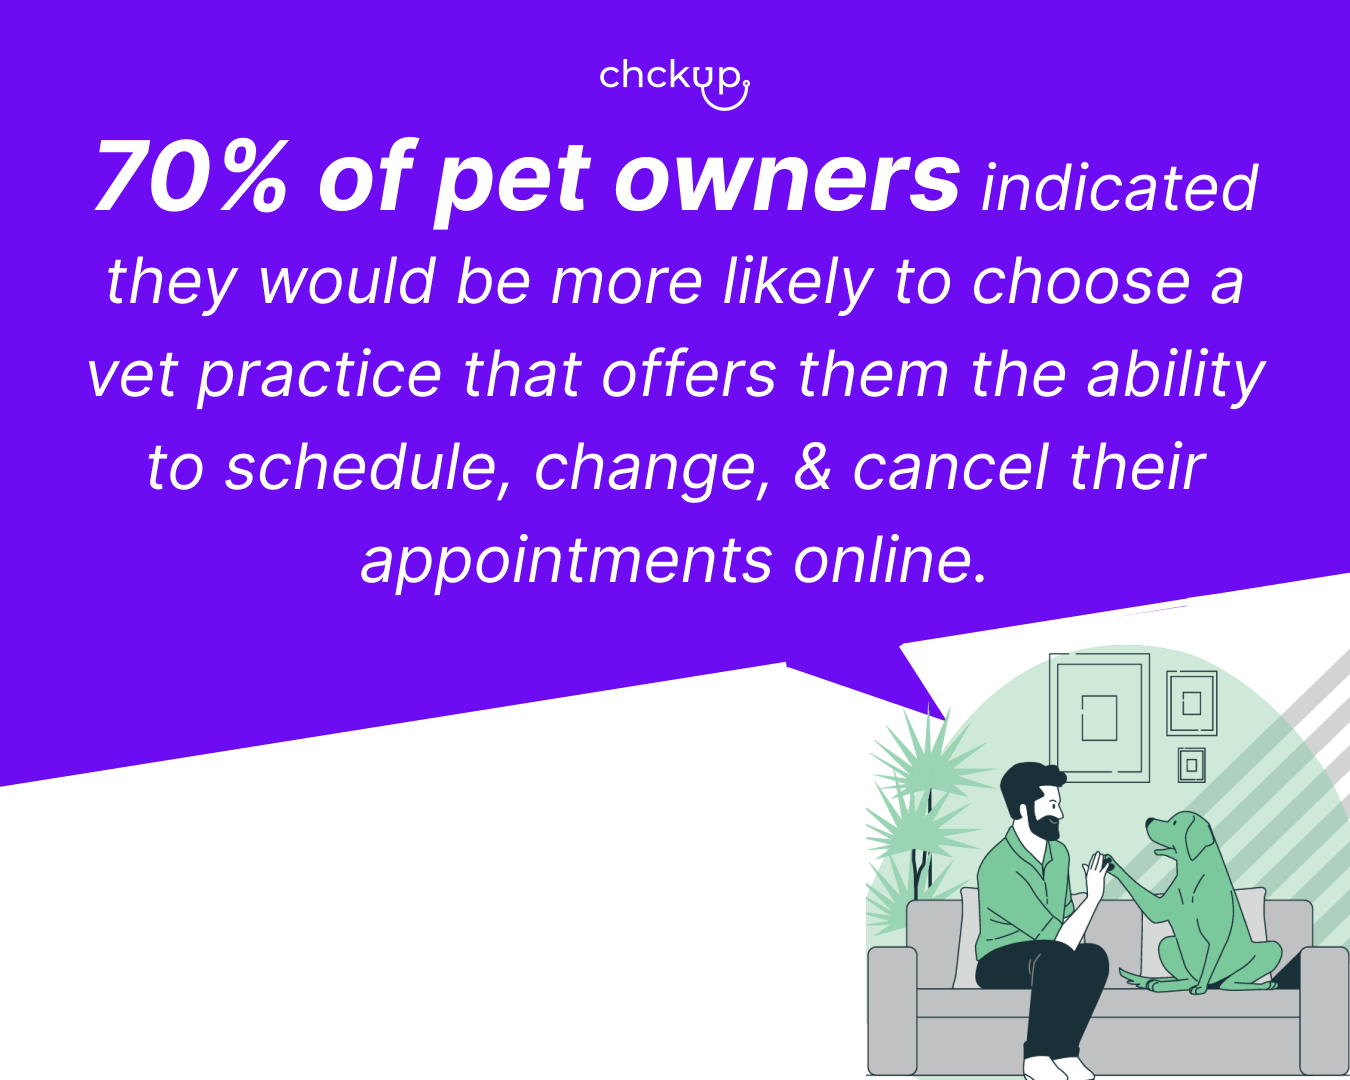 quote from pet owners